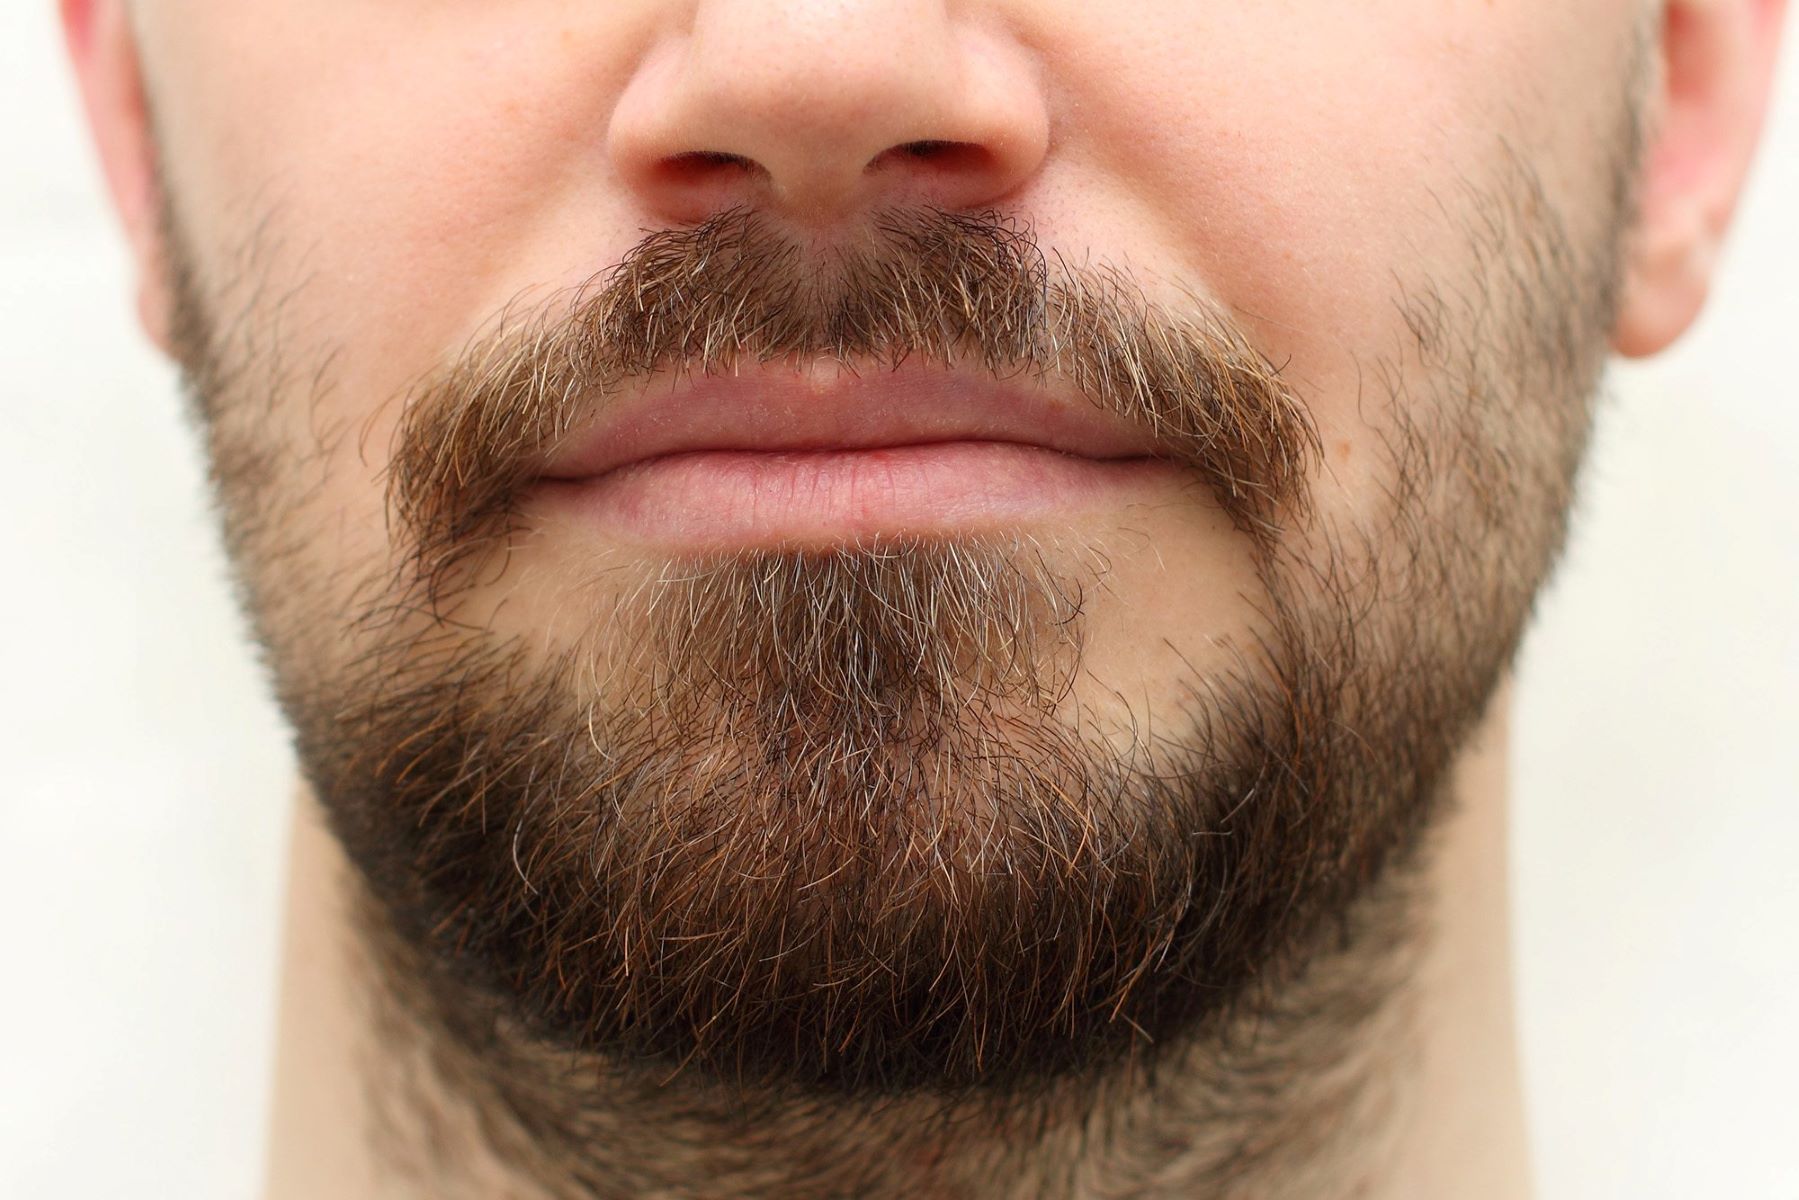 21-year-old’s Facial Hair Transformation: From Chinstrap To Full Beard!